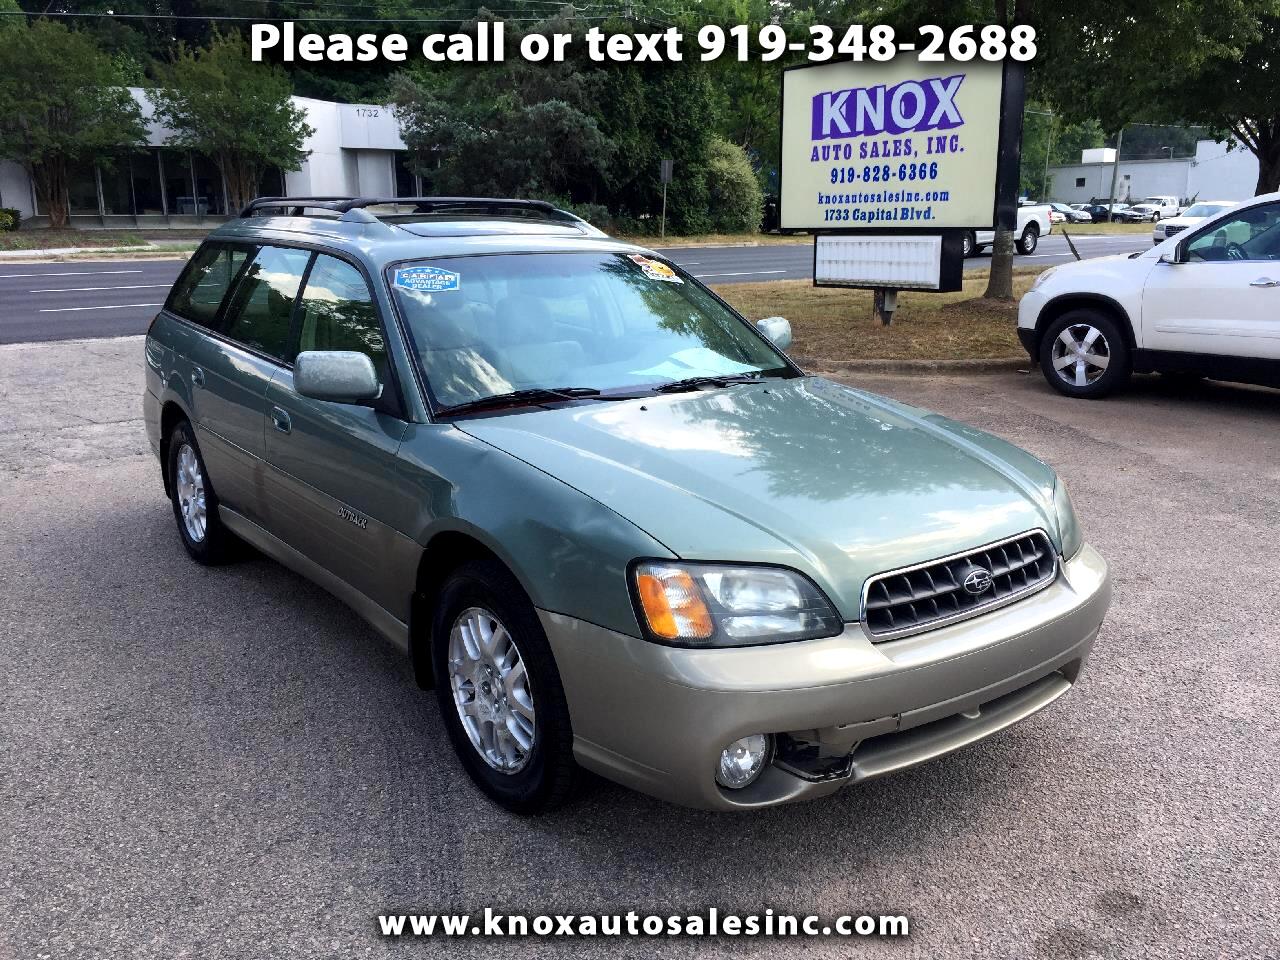 Used 2004 Subaru Outback Limited Wagon for Sale in Raleigh